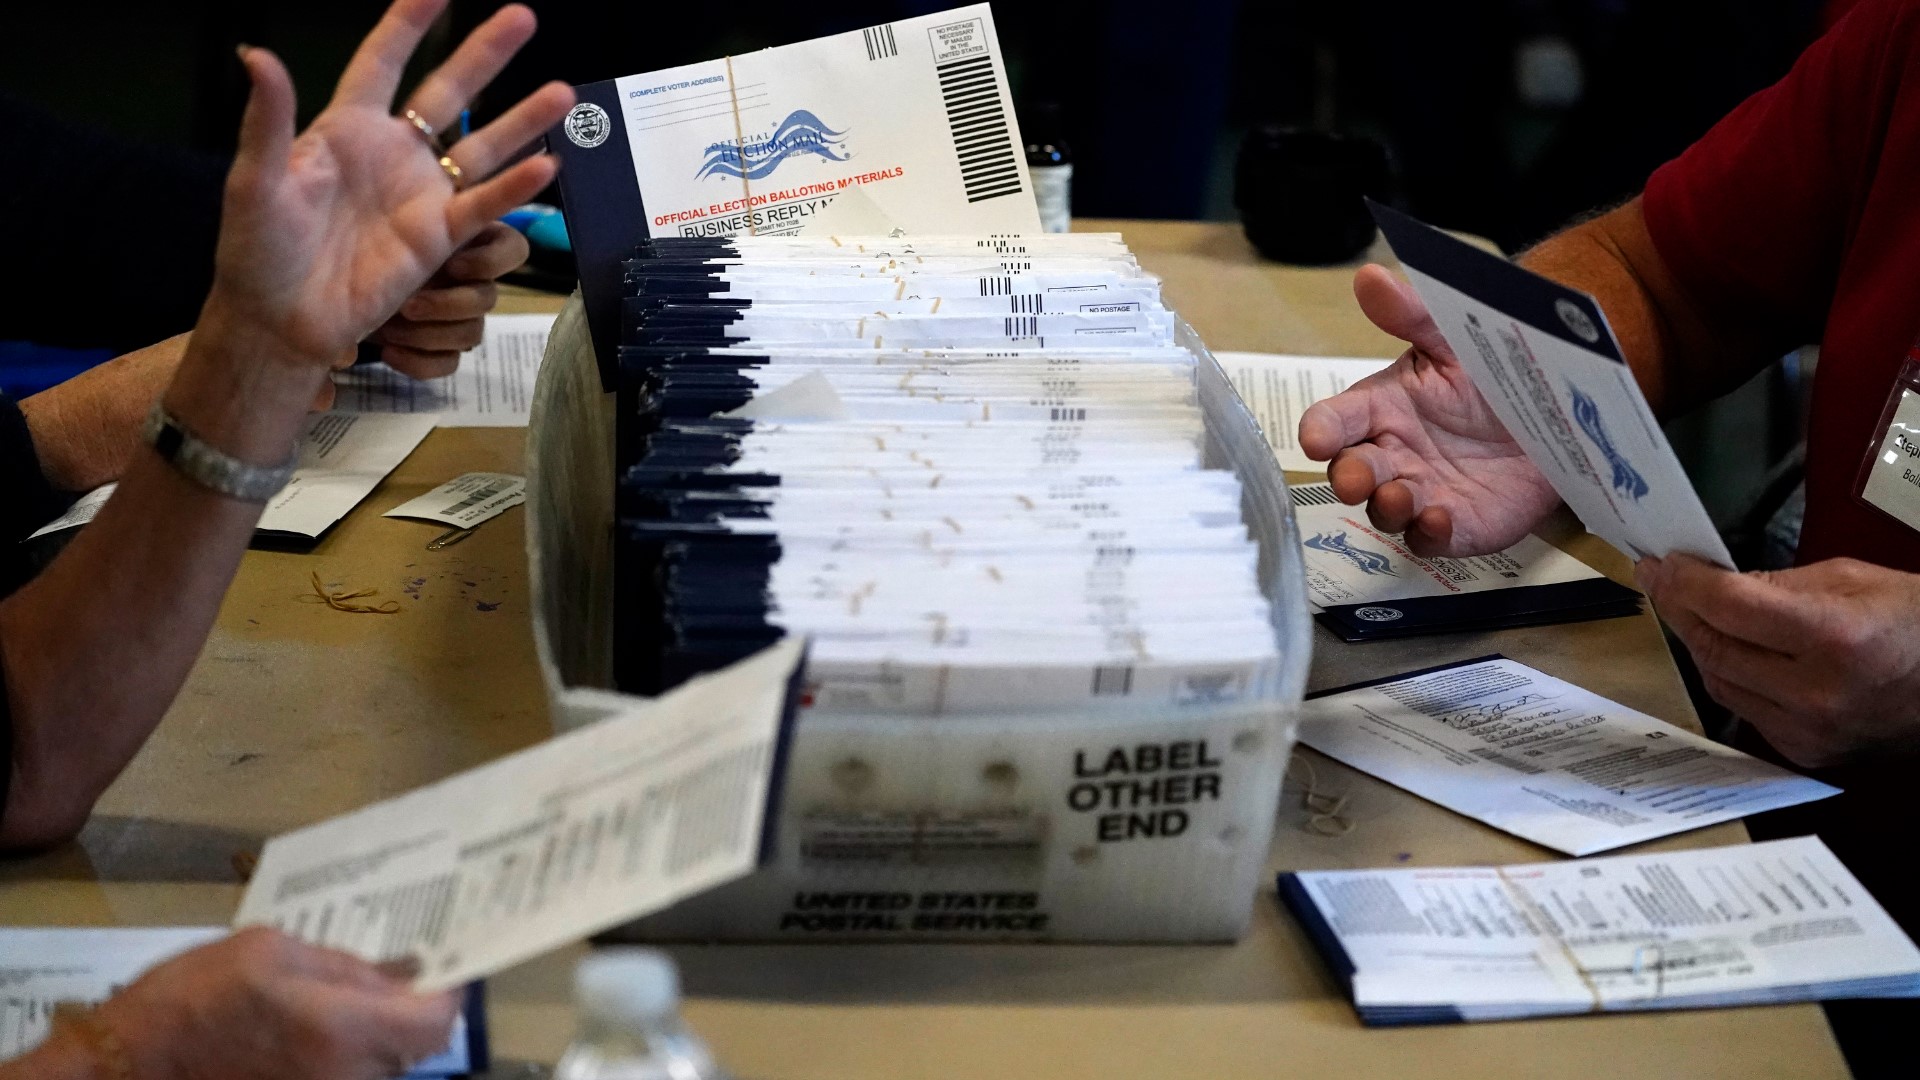 Upon attempting to open and scan the first batch of mail-in ballots on Tuesday, workers discovered "a significant number" of them were incorrectly coded.